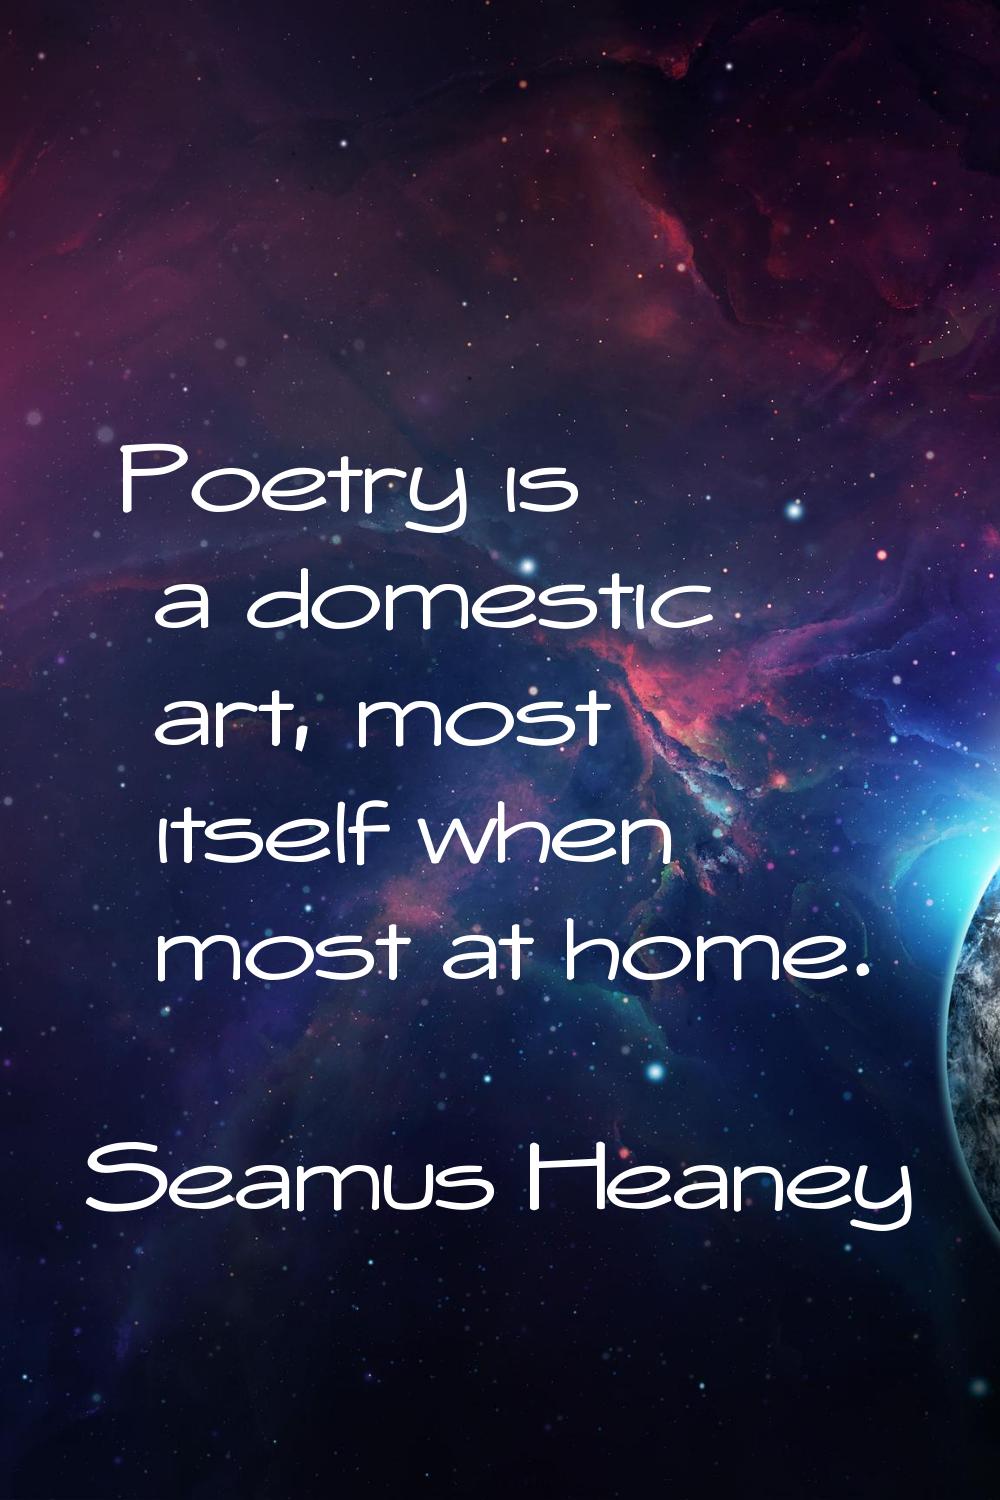 Poetry is a domestic art, most itself when most at home.